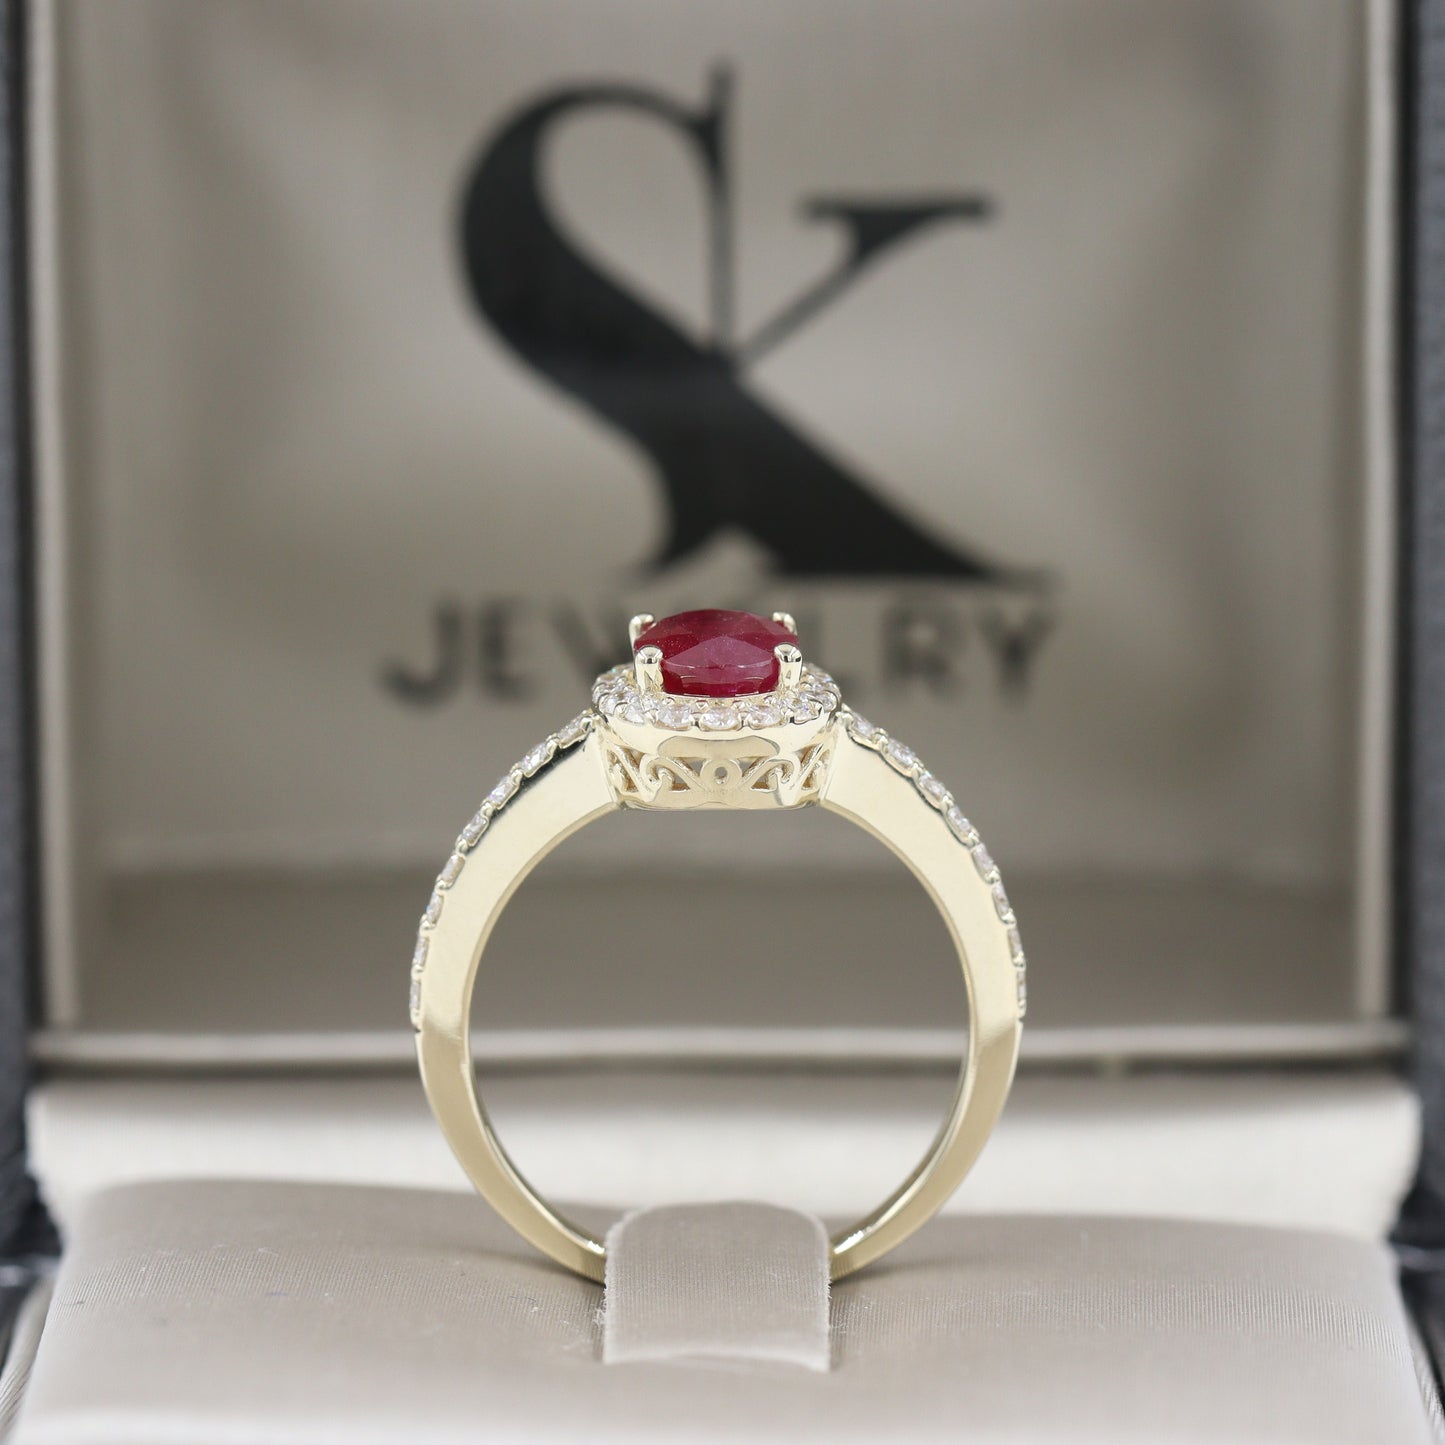 Genuine Ruby Ring/ Ruby Diamond Halo Ring/ Diamond Dainty Ring/ Ruby Engagement Ring/ Anniversary Ring/ Gift For Her/ Anniversary Gift